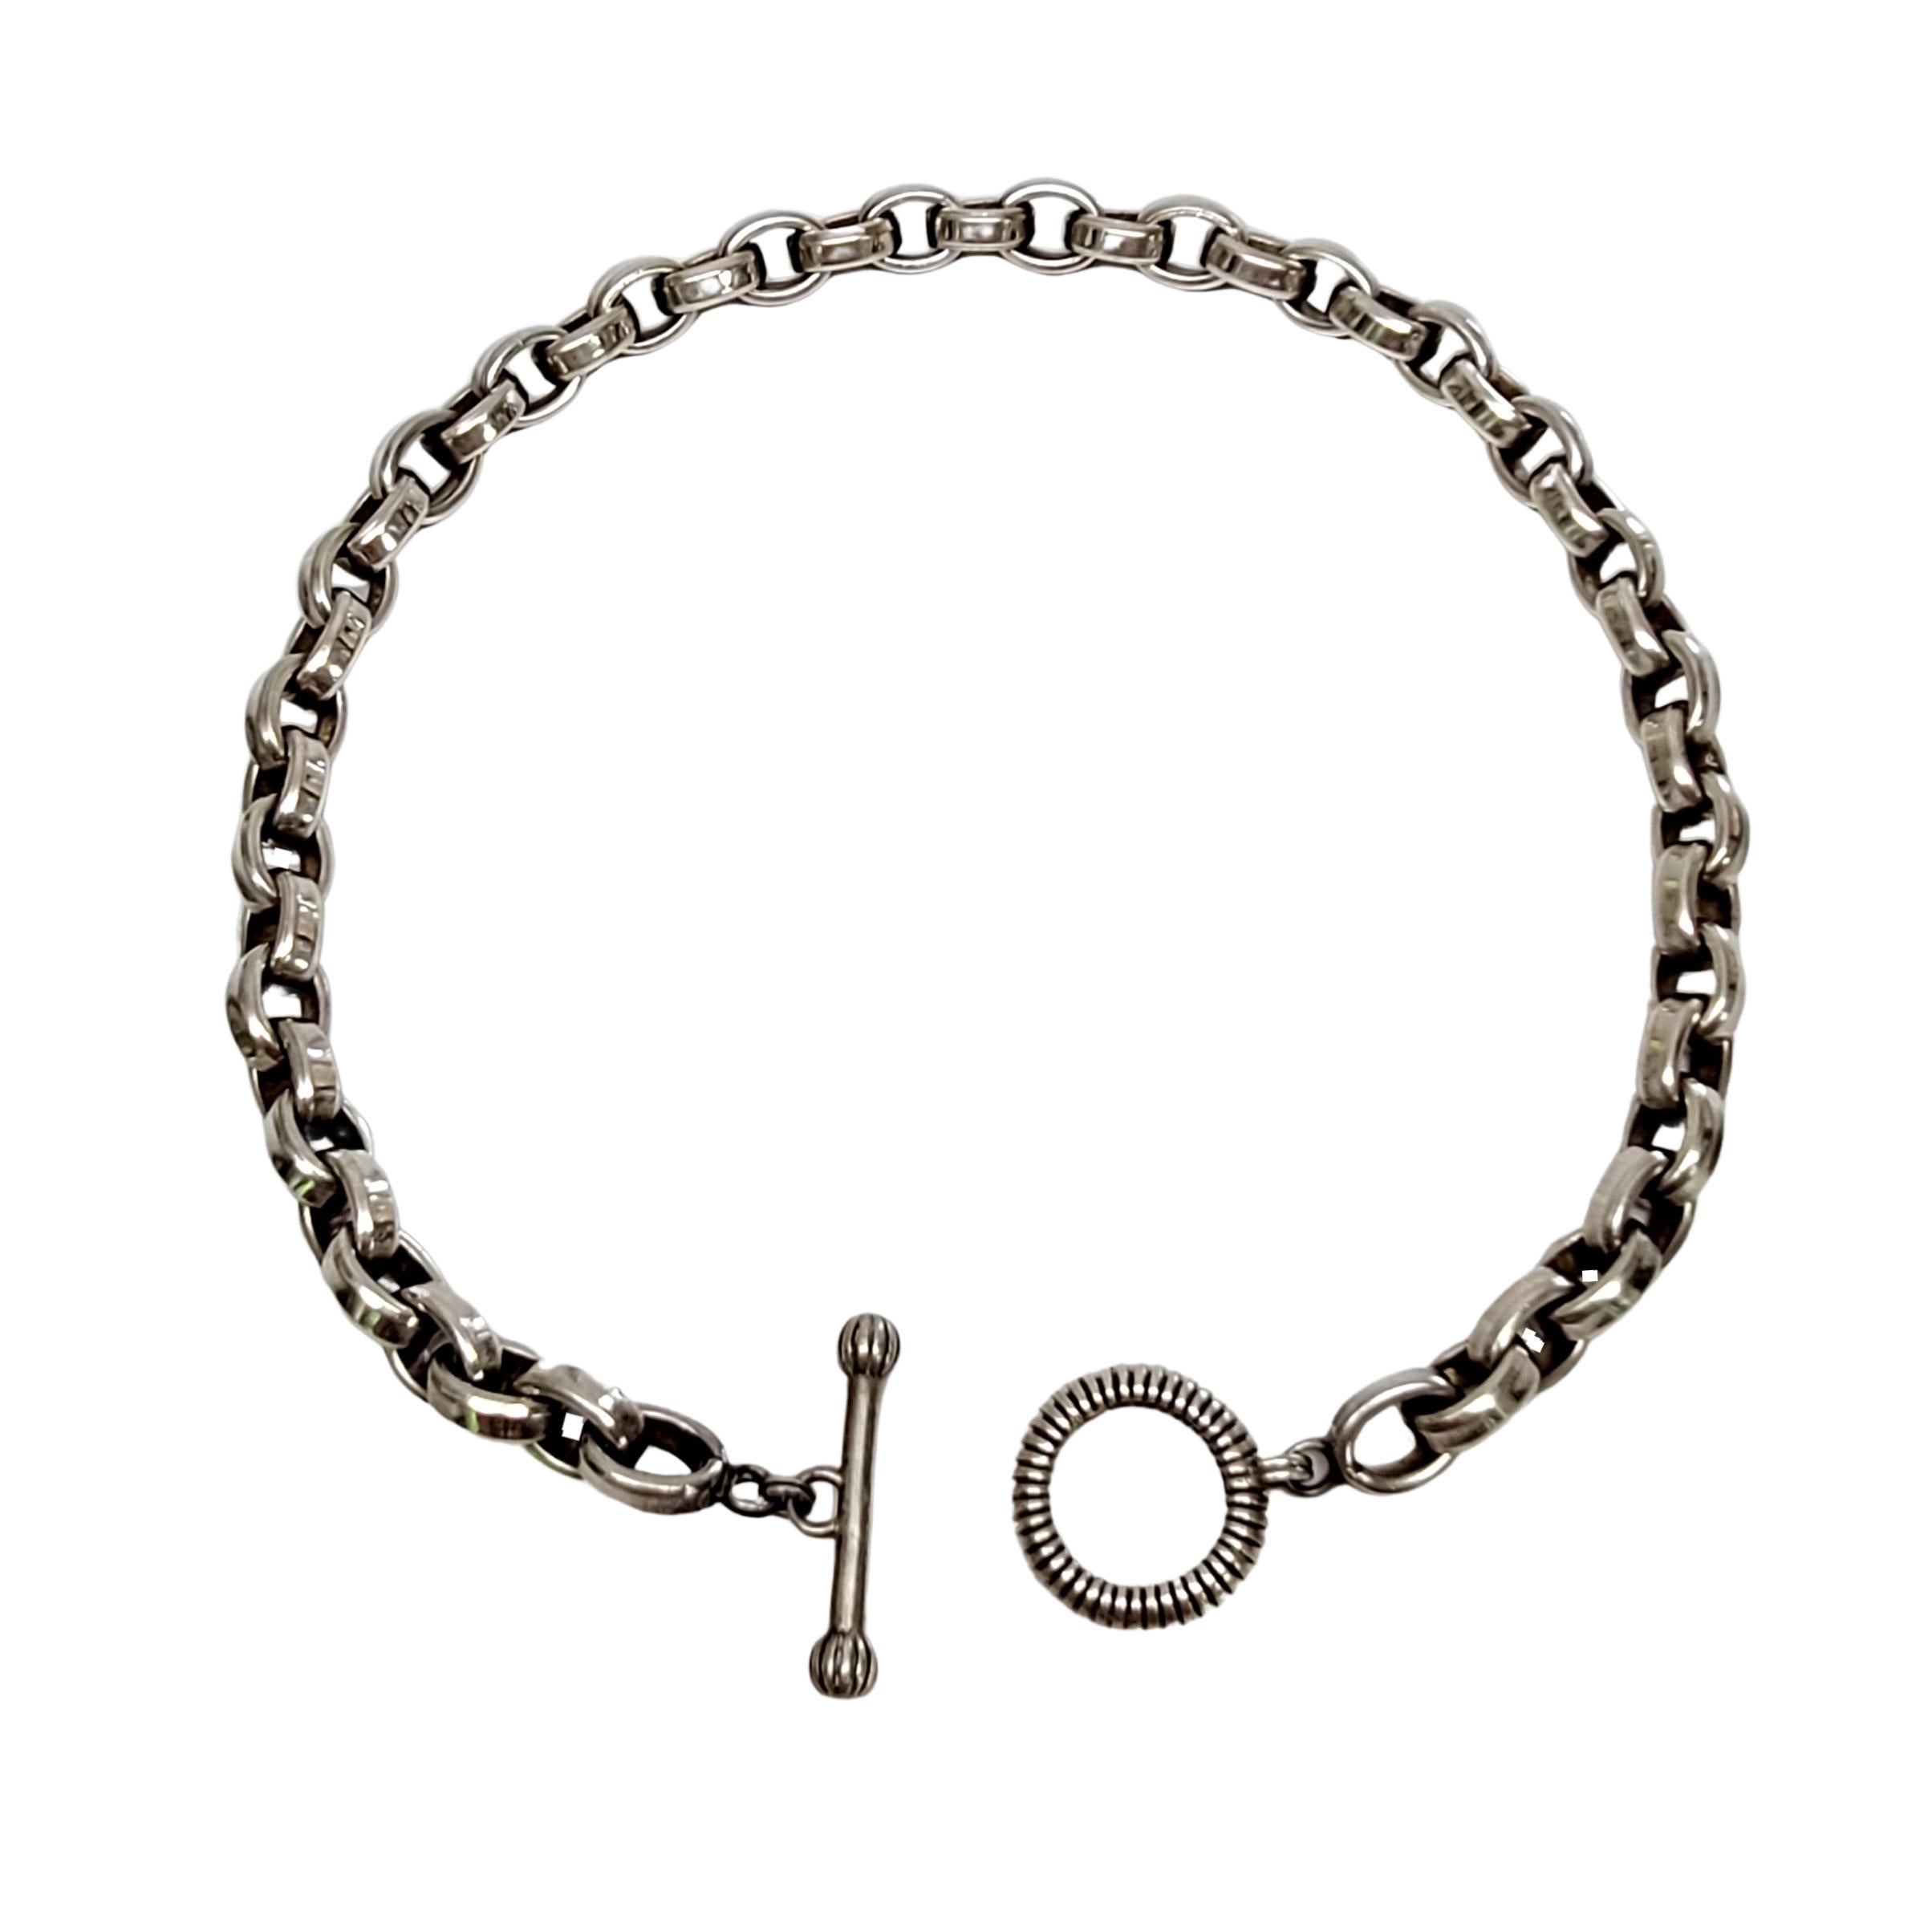 Sterling silver rolo link necklace with toggle closure by Stephen Dweck.

Designed by Stephen Dweck, this heavy and substantial smooth oval shaped rolo link necklace with textured toggle closure.

Measures approx 17